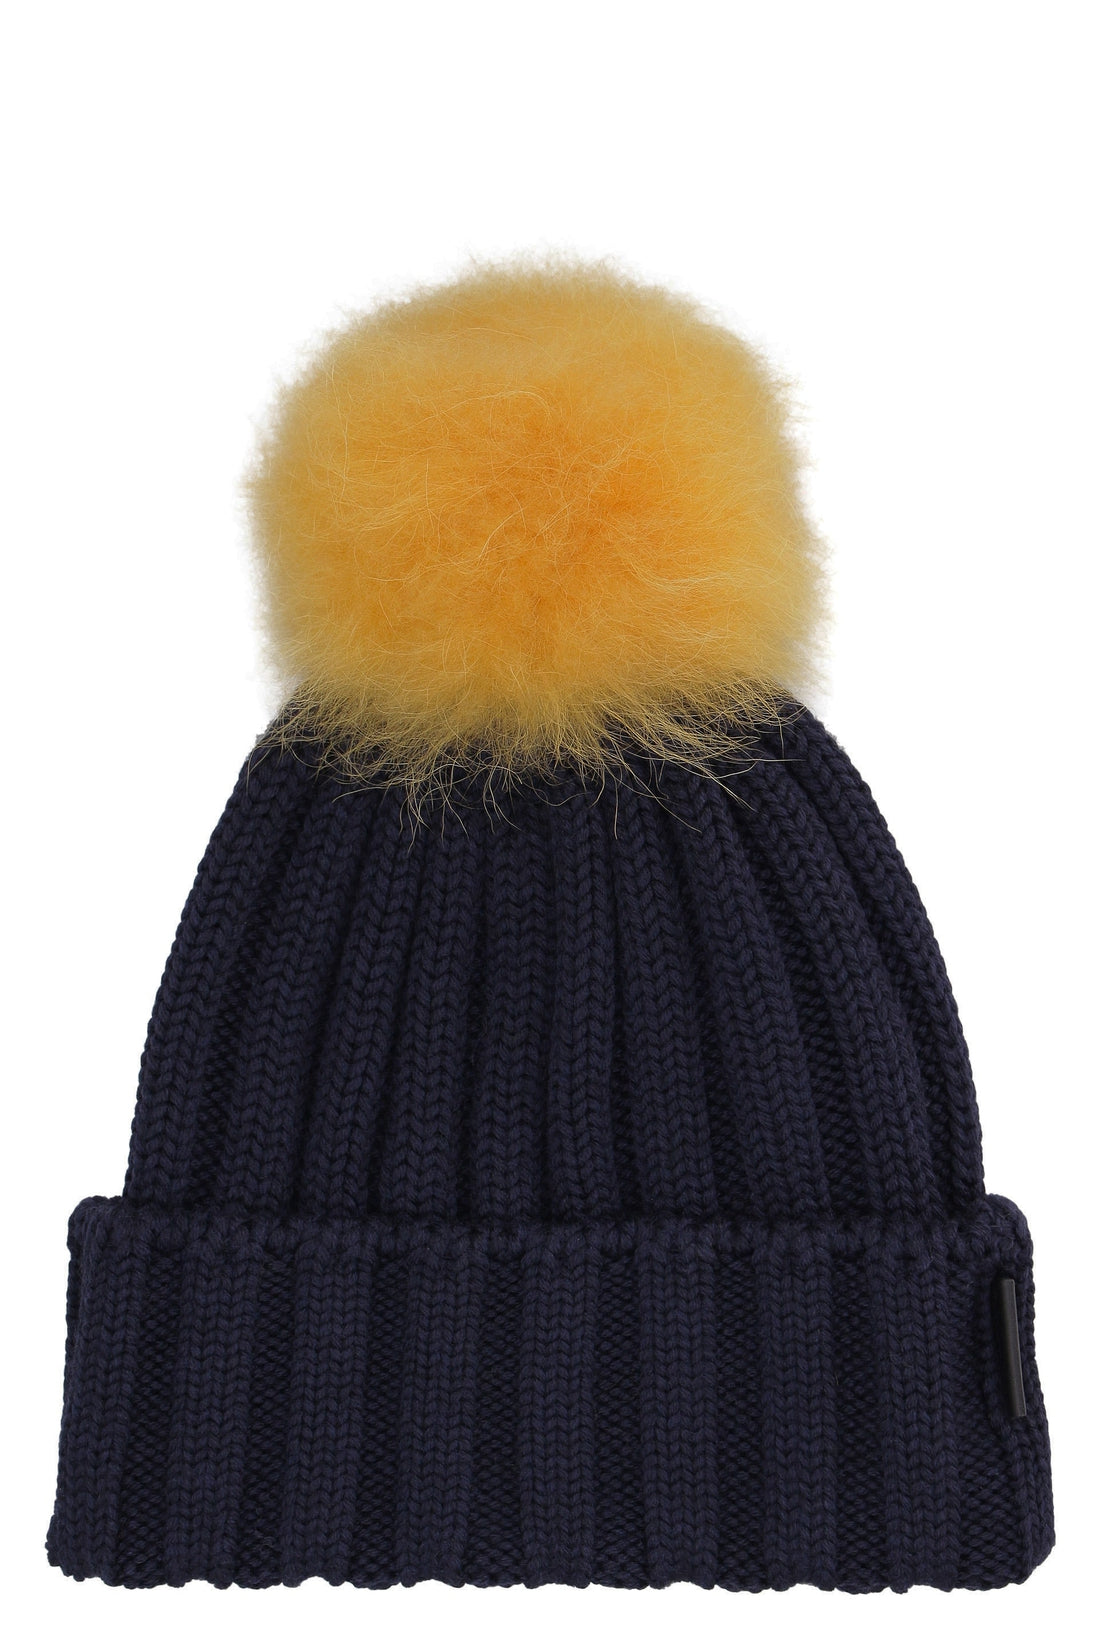 Woolrich-OUTLET-SALE-Wool beanie with pom-pom-ARCHIVIST